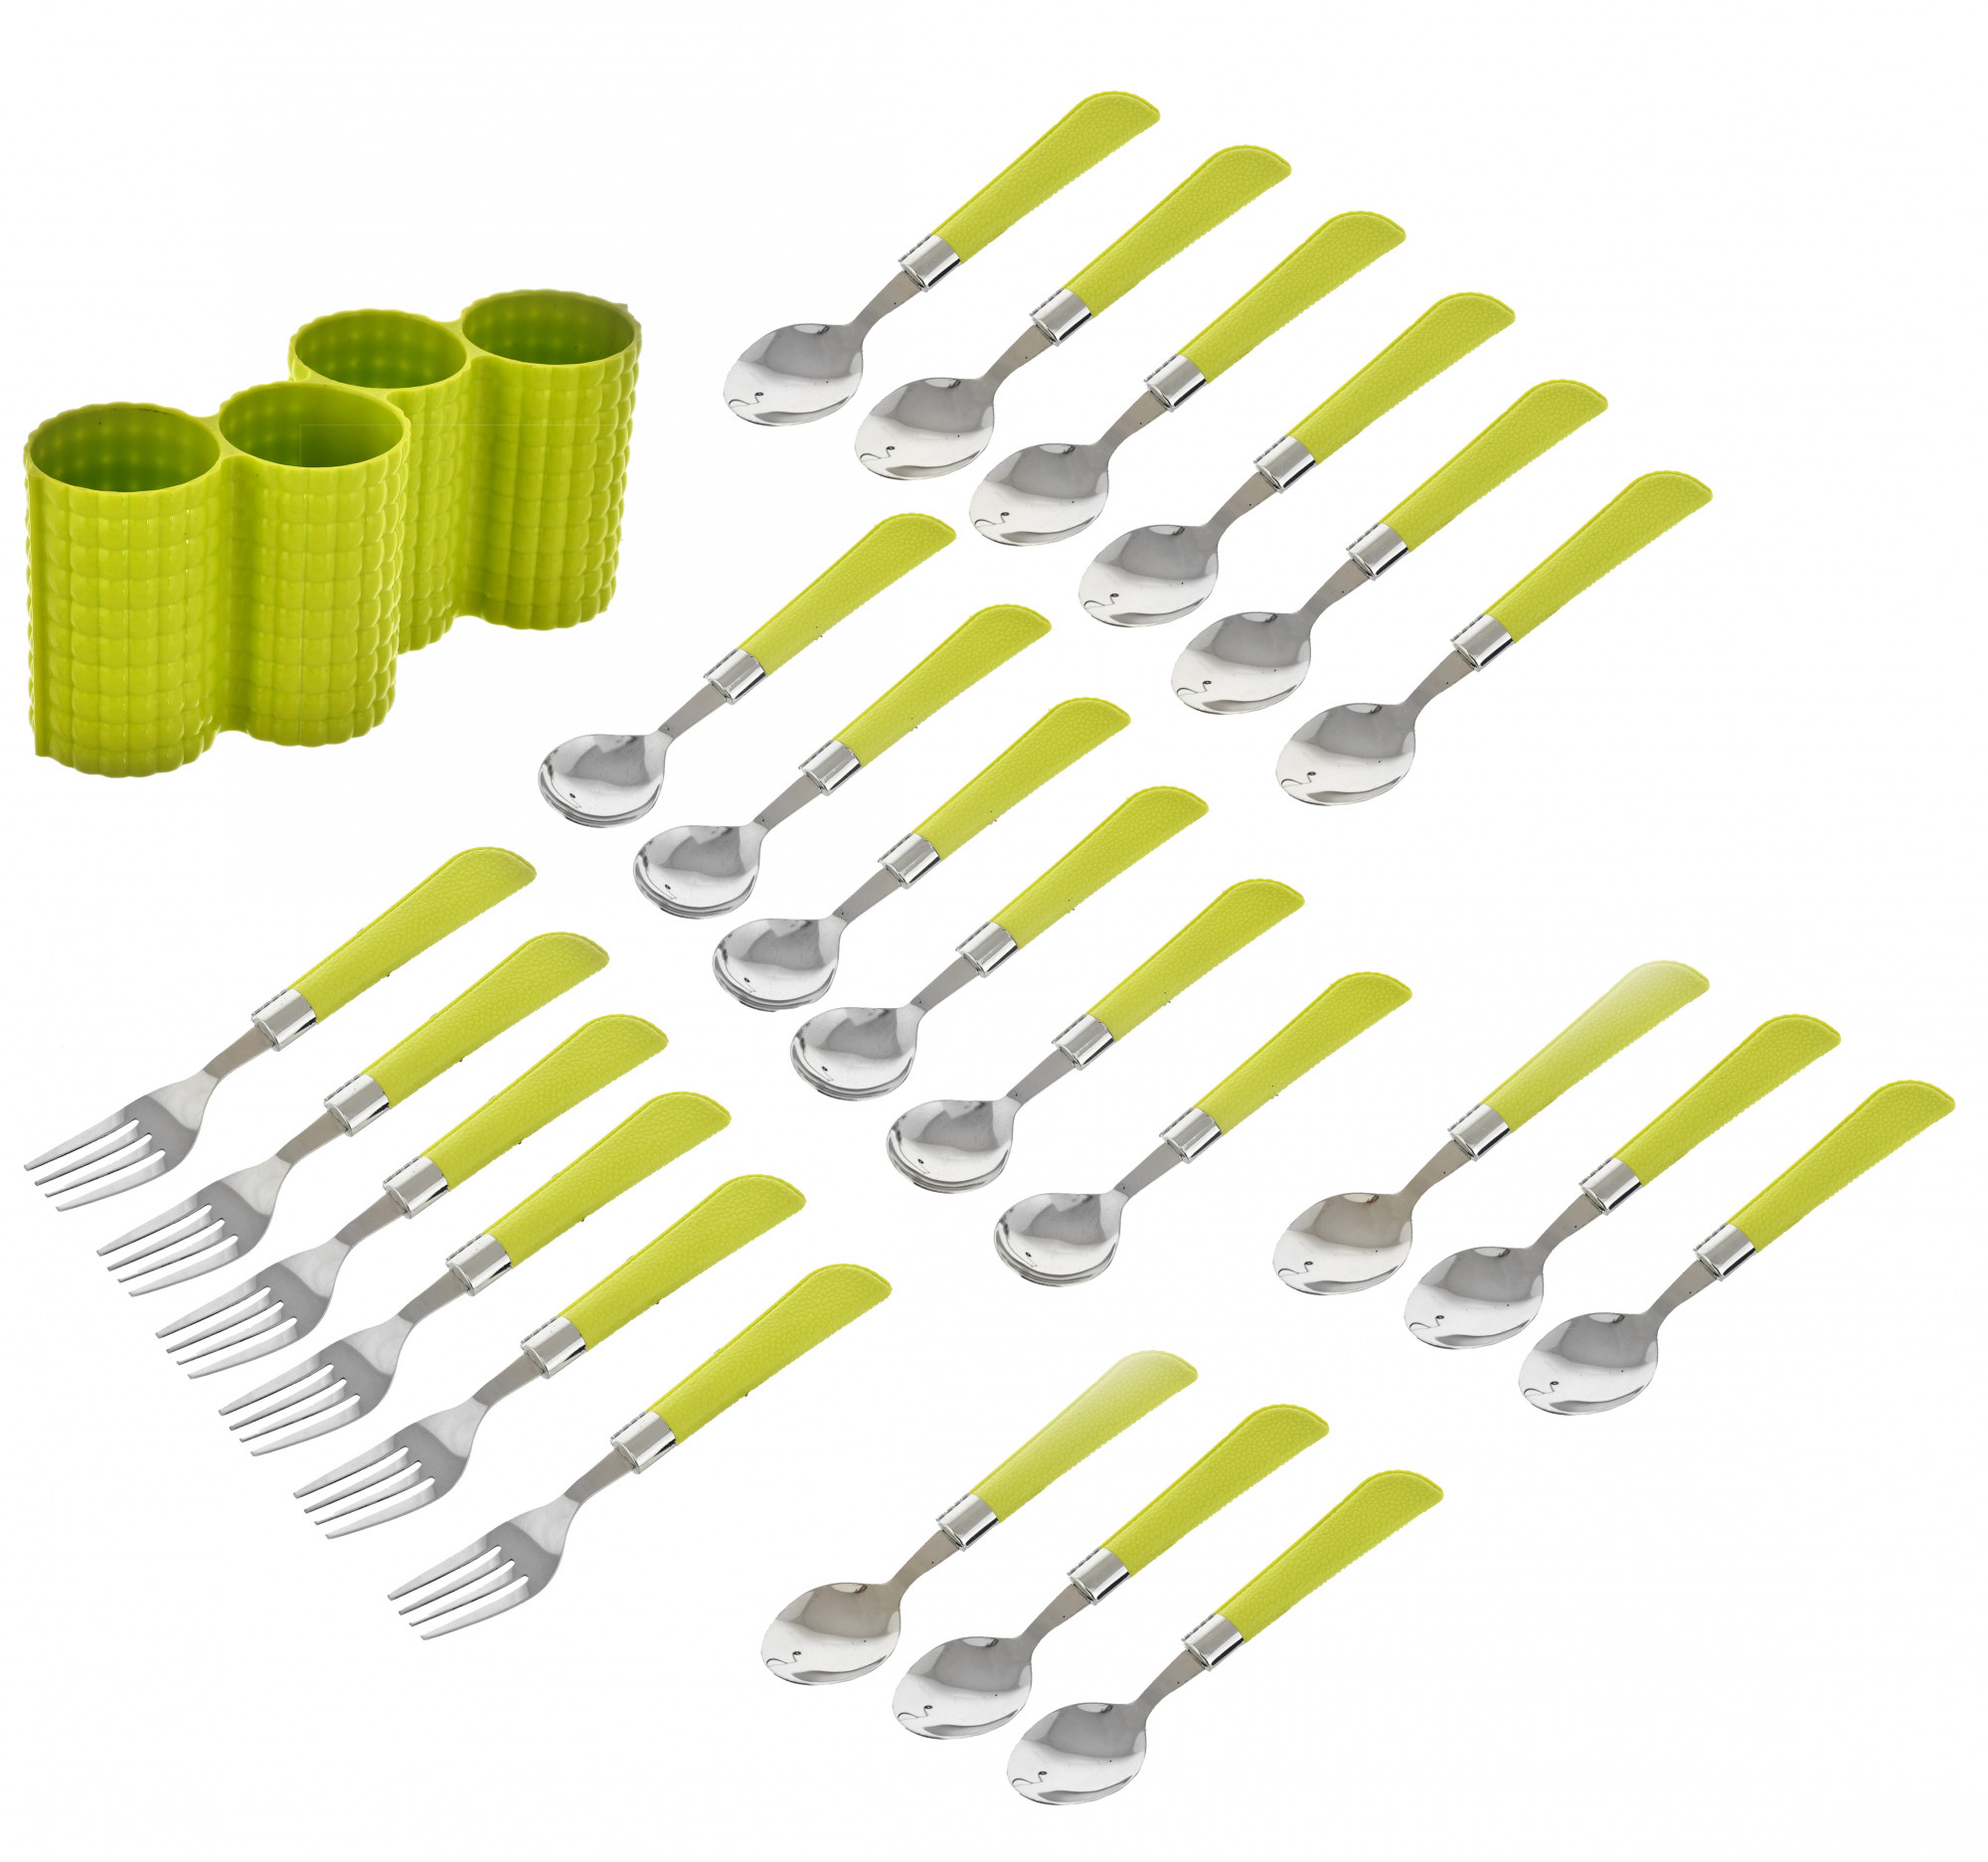 Kuber Industries ABS Plastic & Stainless Steel Nice Cutlery Set, 6 Dessert Spoon, 6 Fork, 6 Soup Spoon, 6 Tea Spoon With 1 Stand (Set of 24, Green)-KUBMART3294